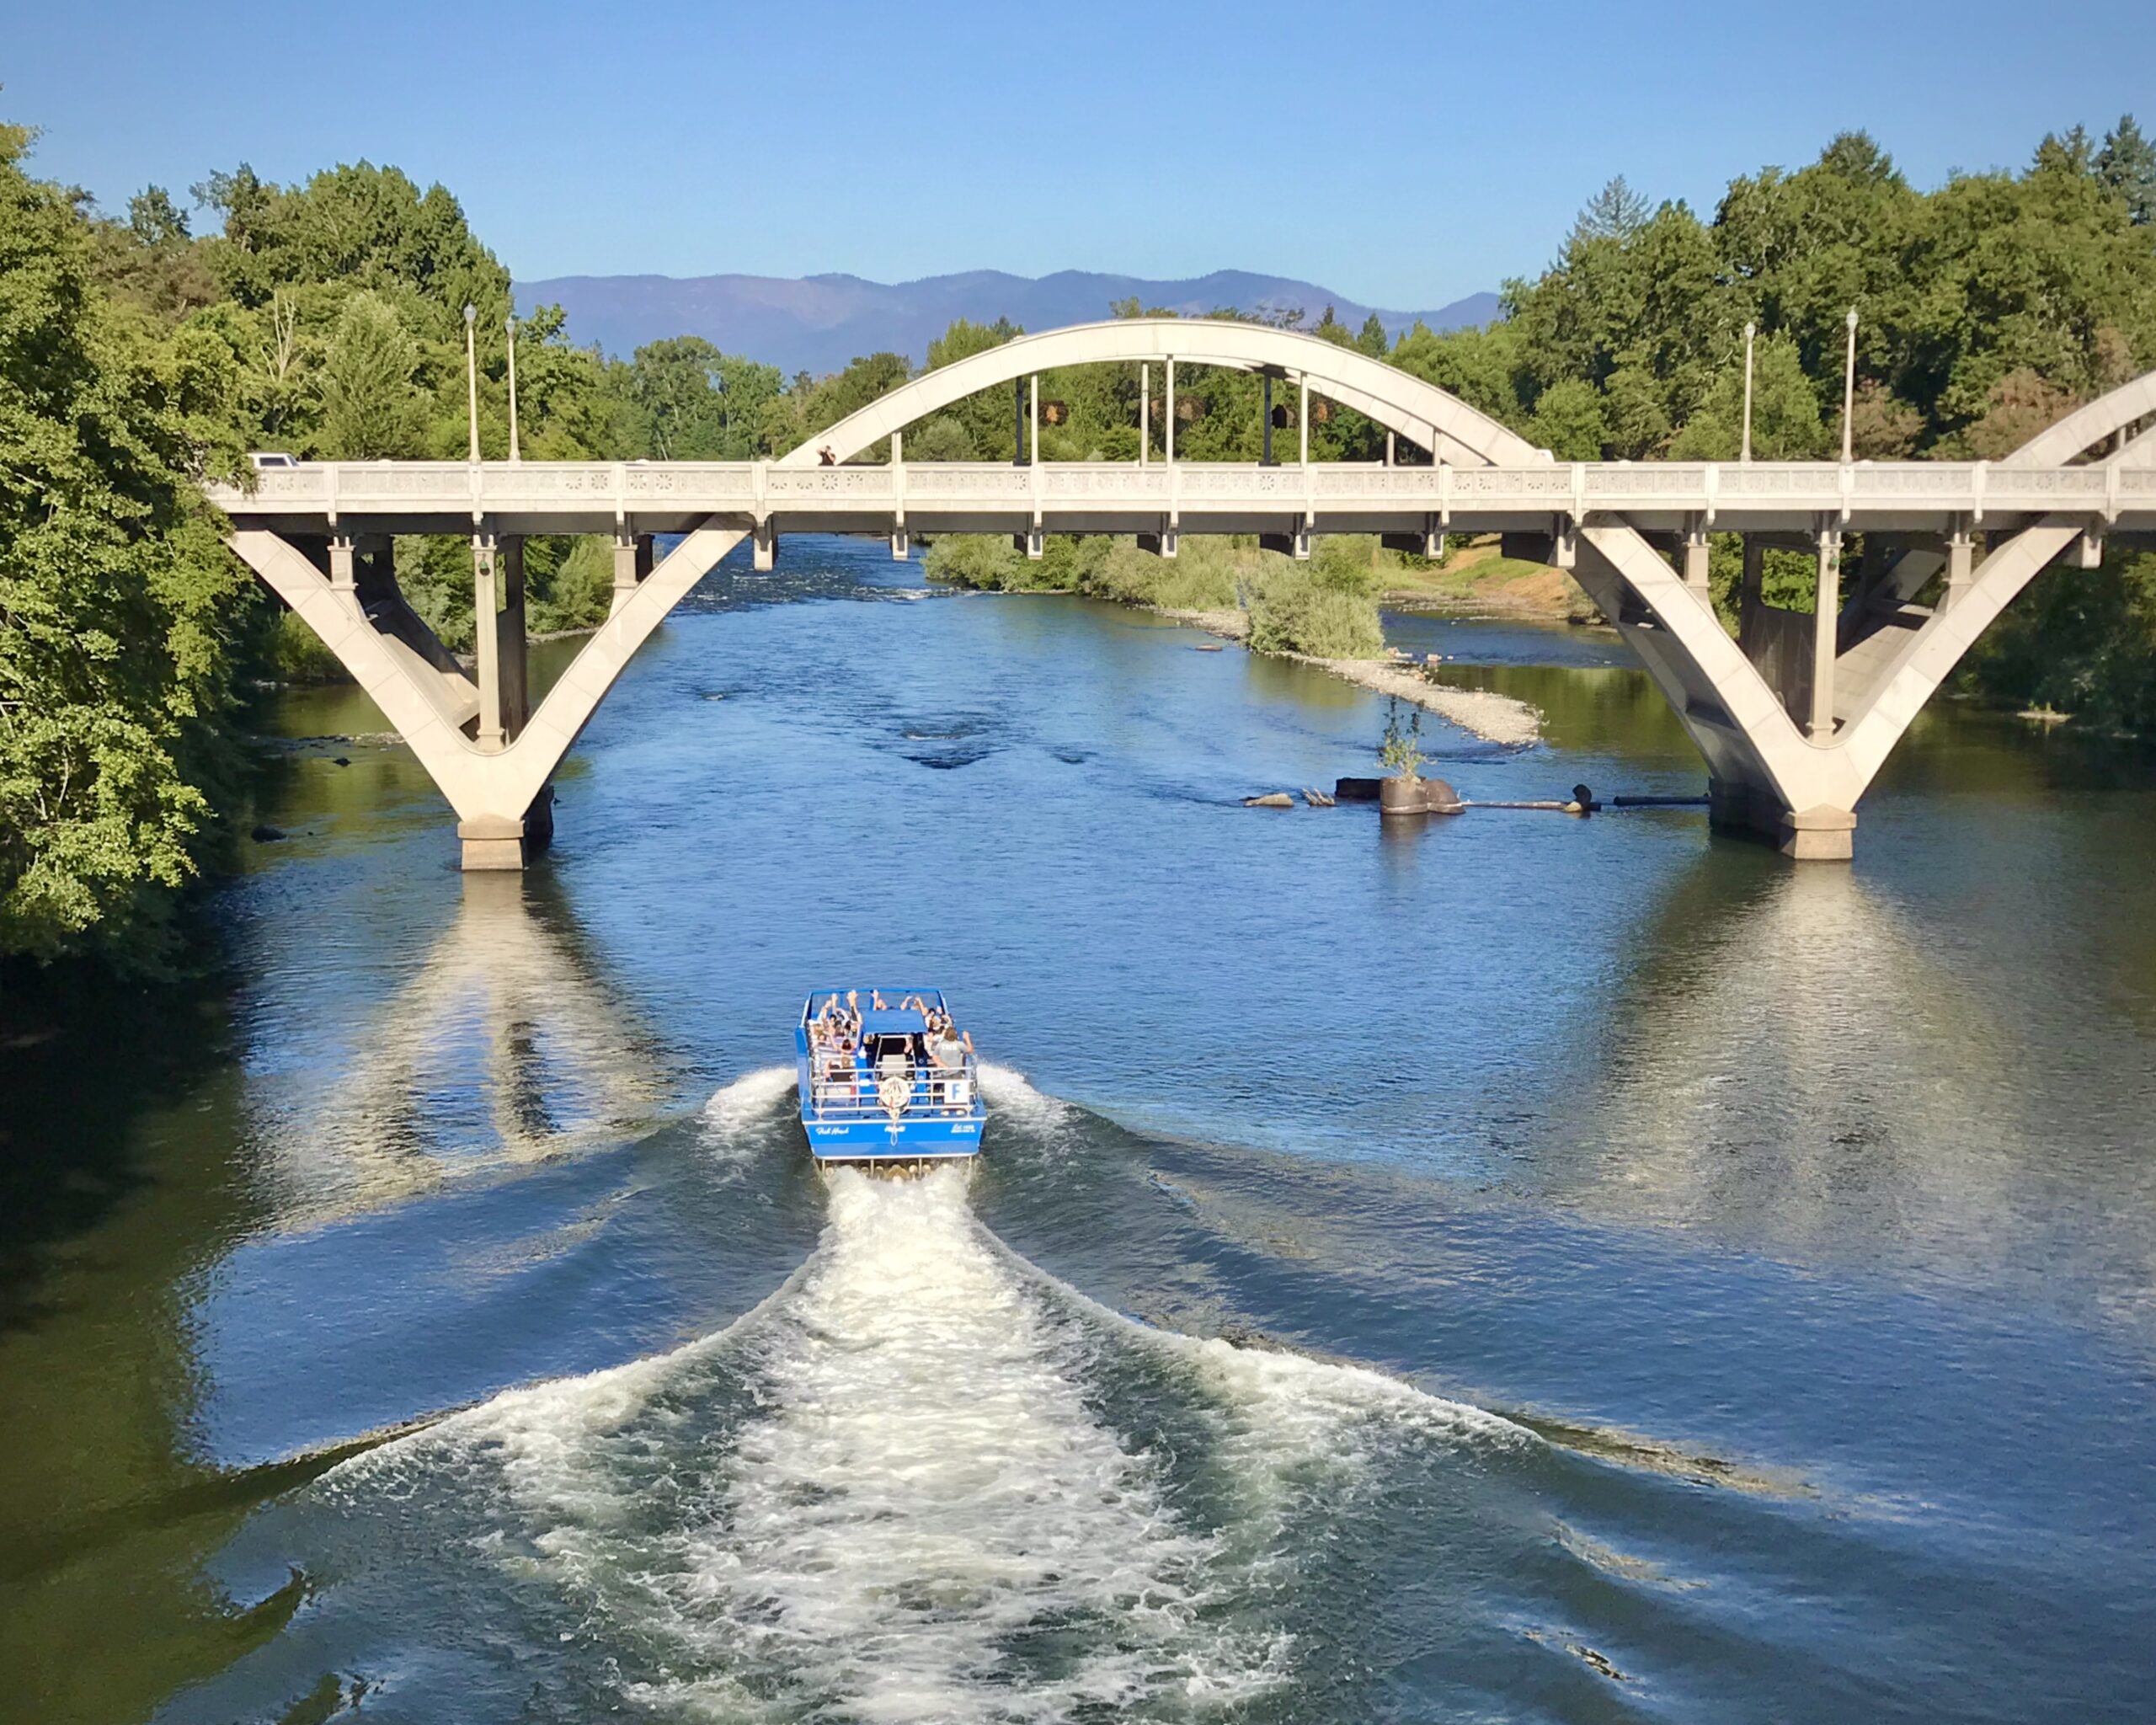 The Hellgate jet boat is tearing through the water, leaving vast ripples behind it as it zooms towards passing under the bridge to Grants Pass, heading down the deep blue Rogue River.